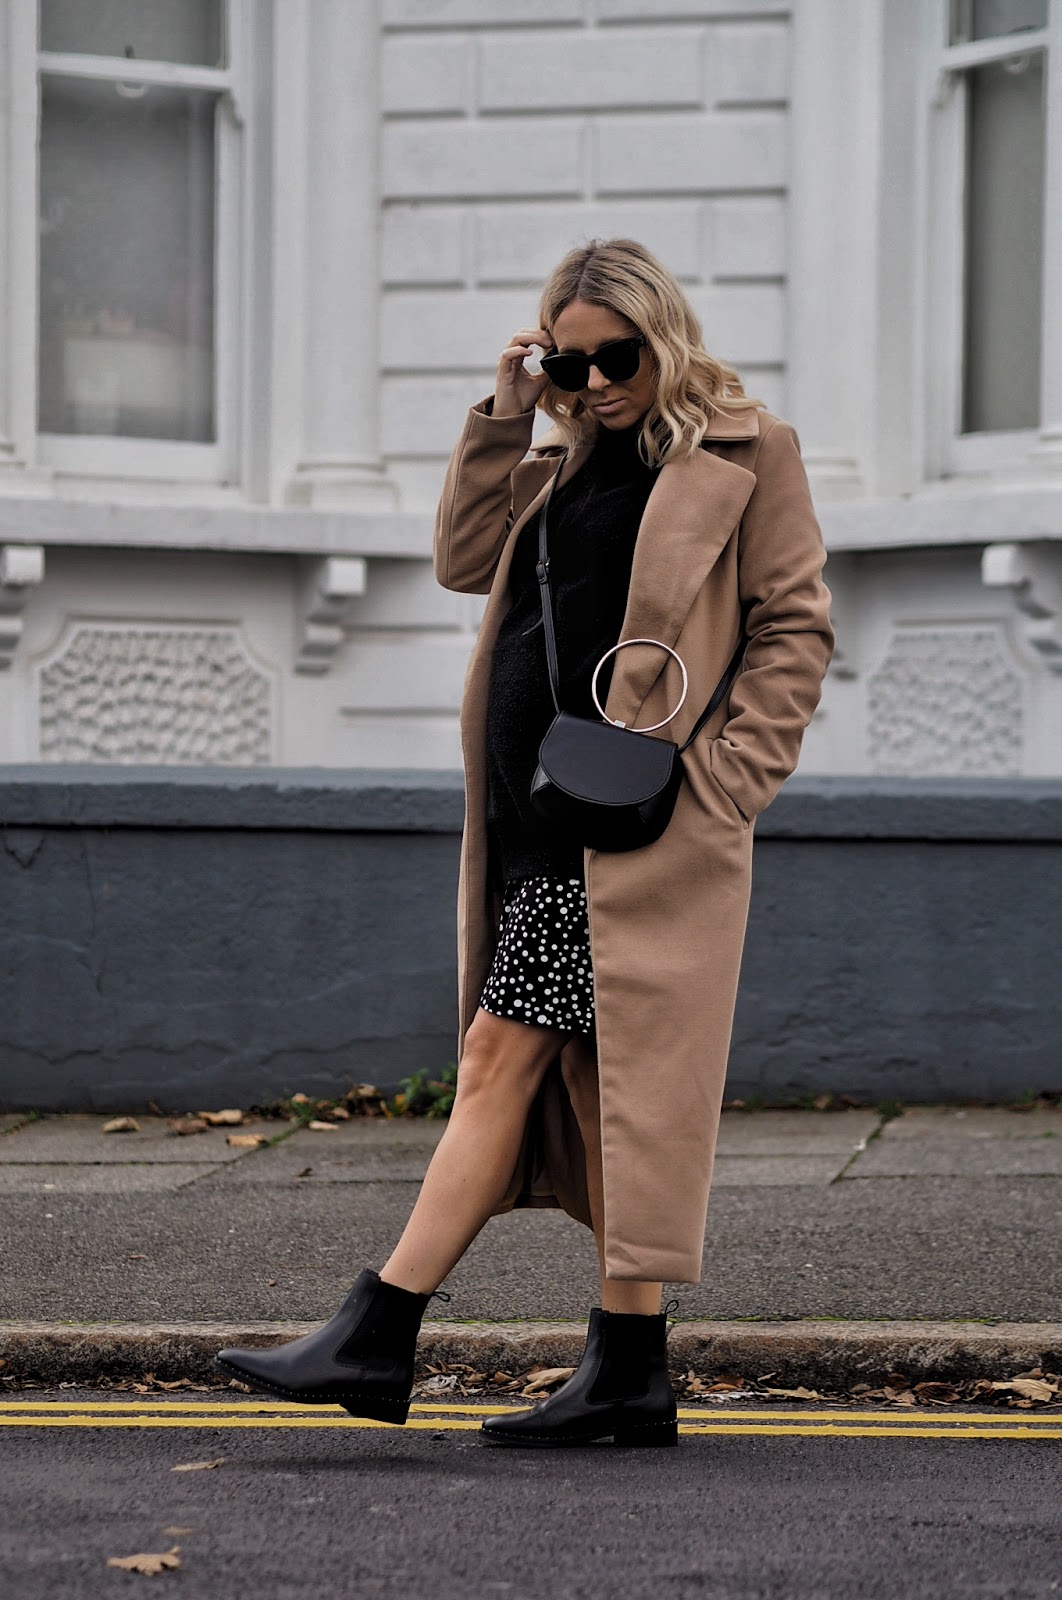 17 Of The Best Ankle Boots - Petite Side of Style